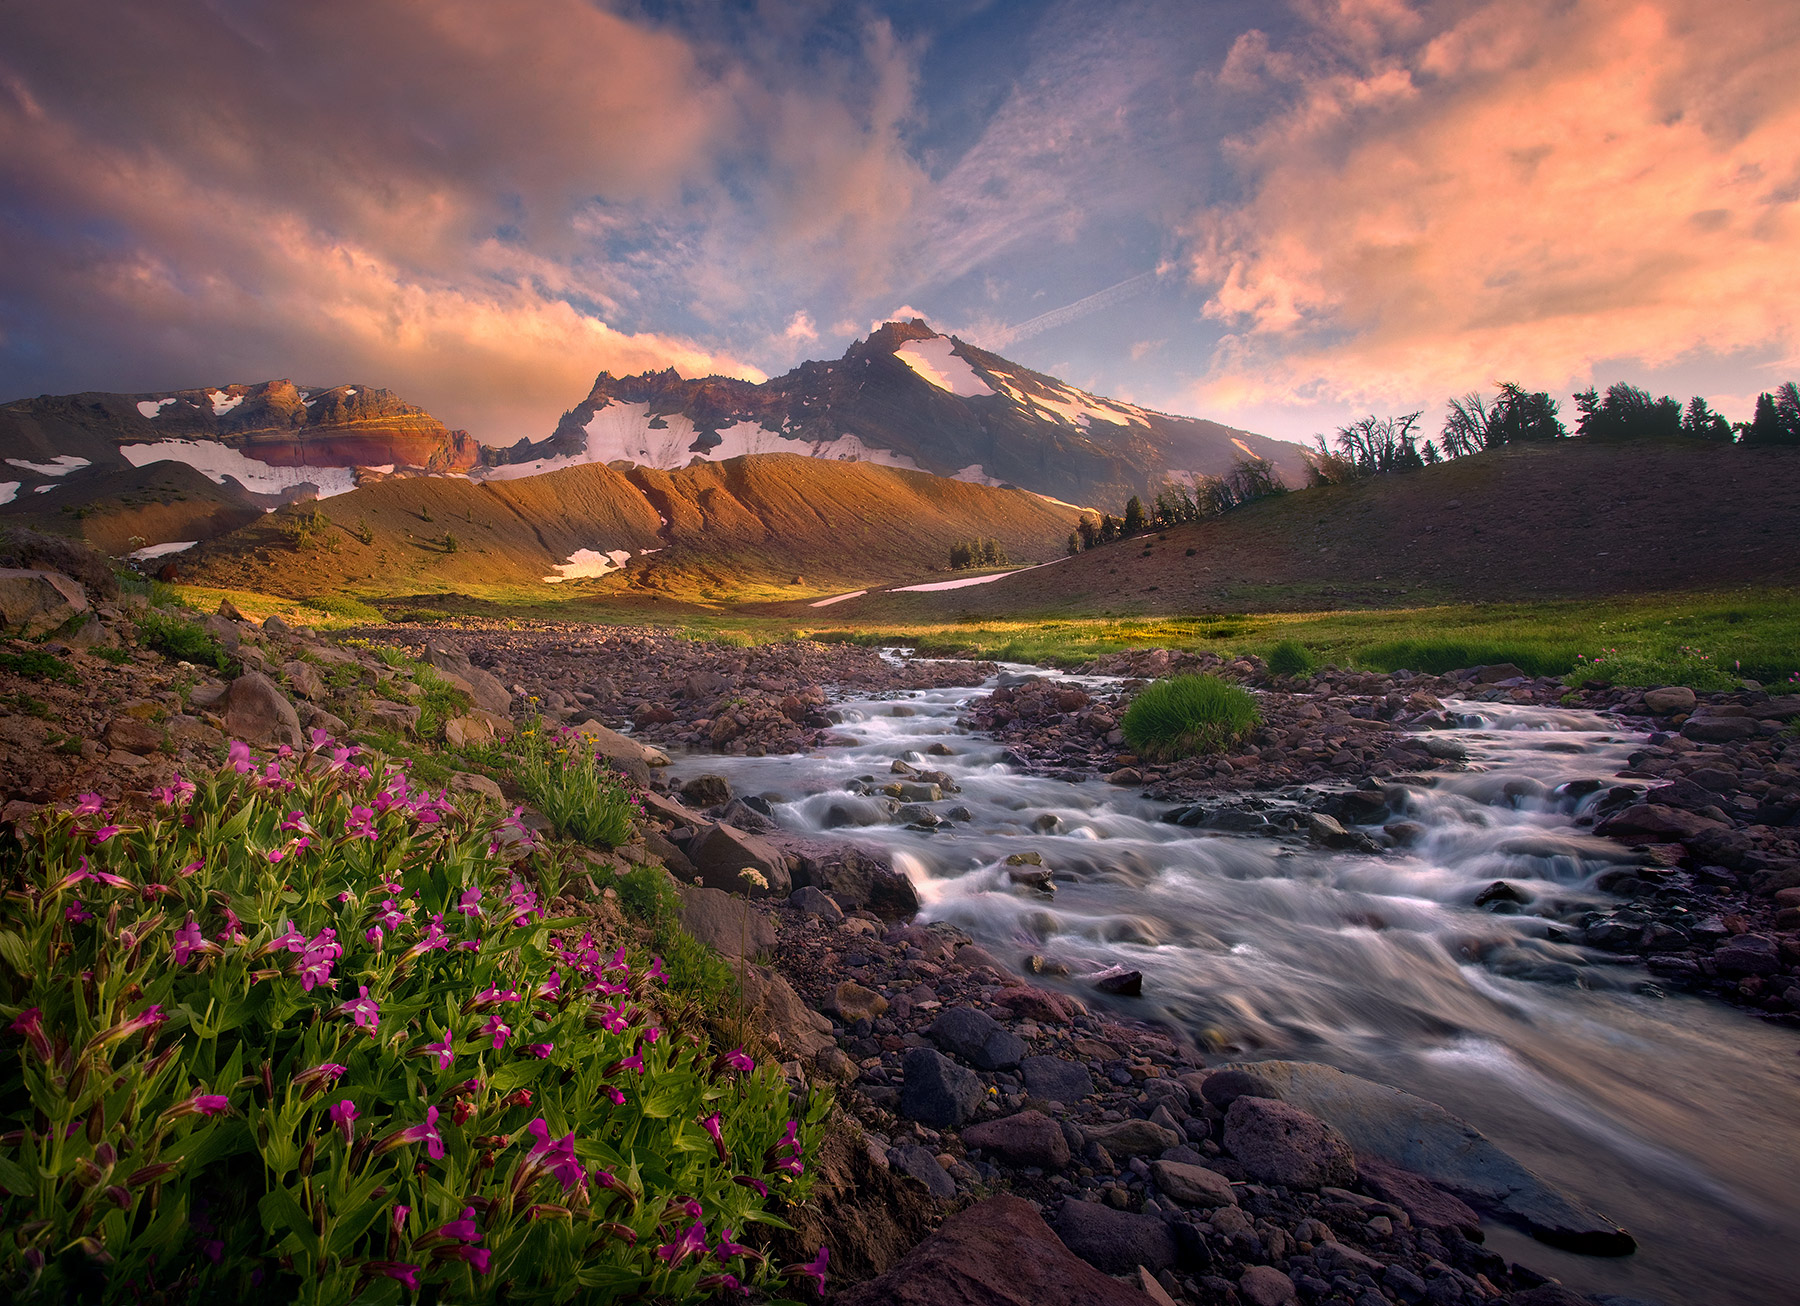 Mountain wildflowers and icy cool glacial stream waters lead the way towards a beautiful sunset over Broken Top peak in Oregon...